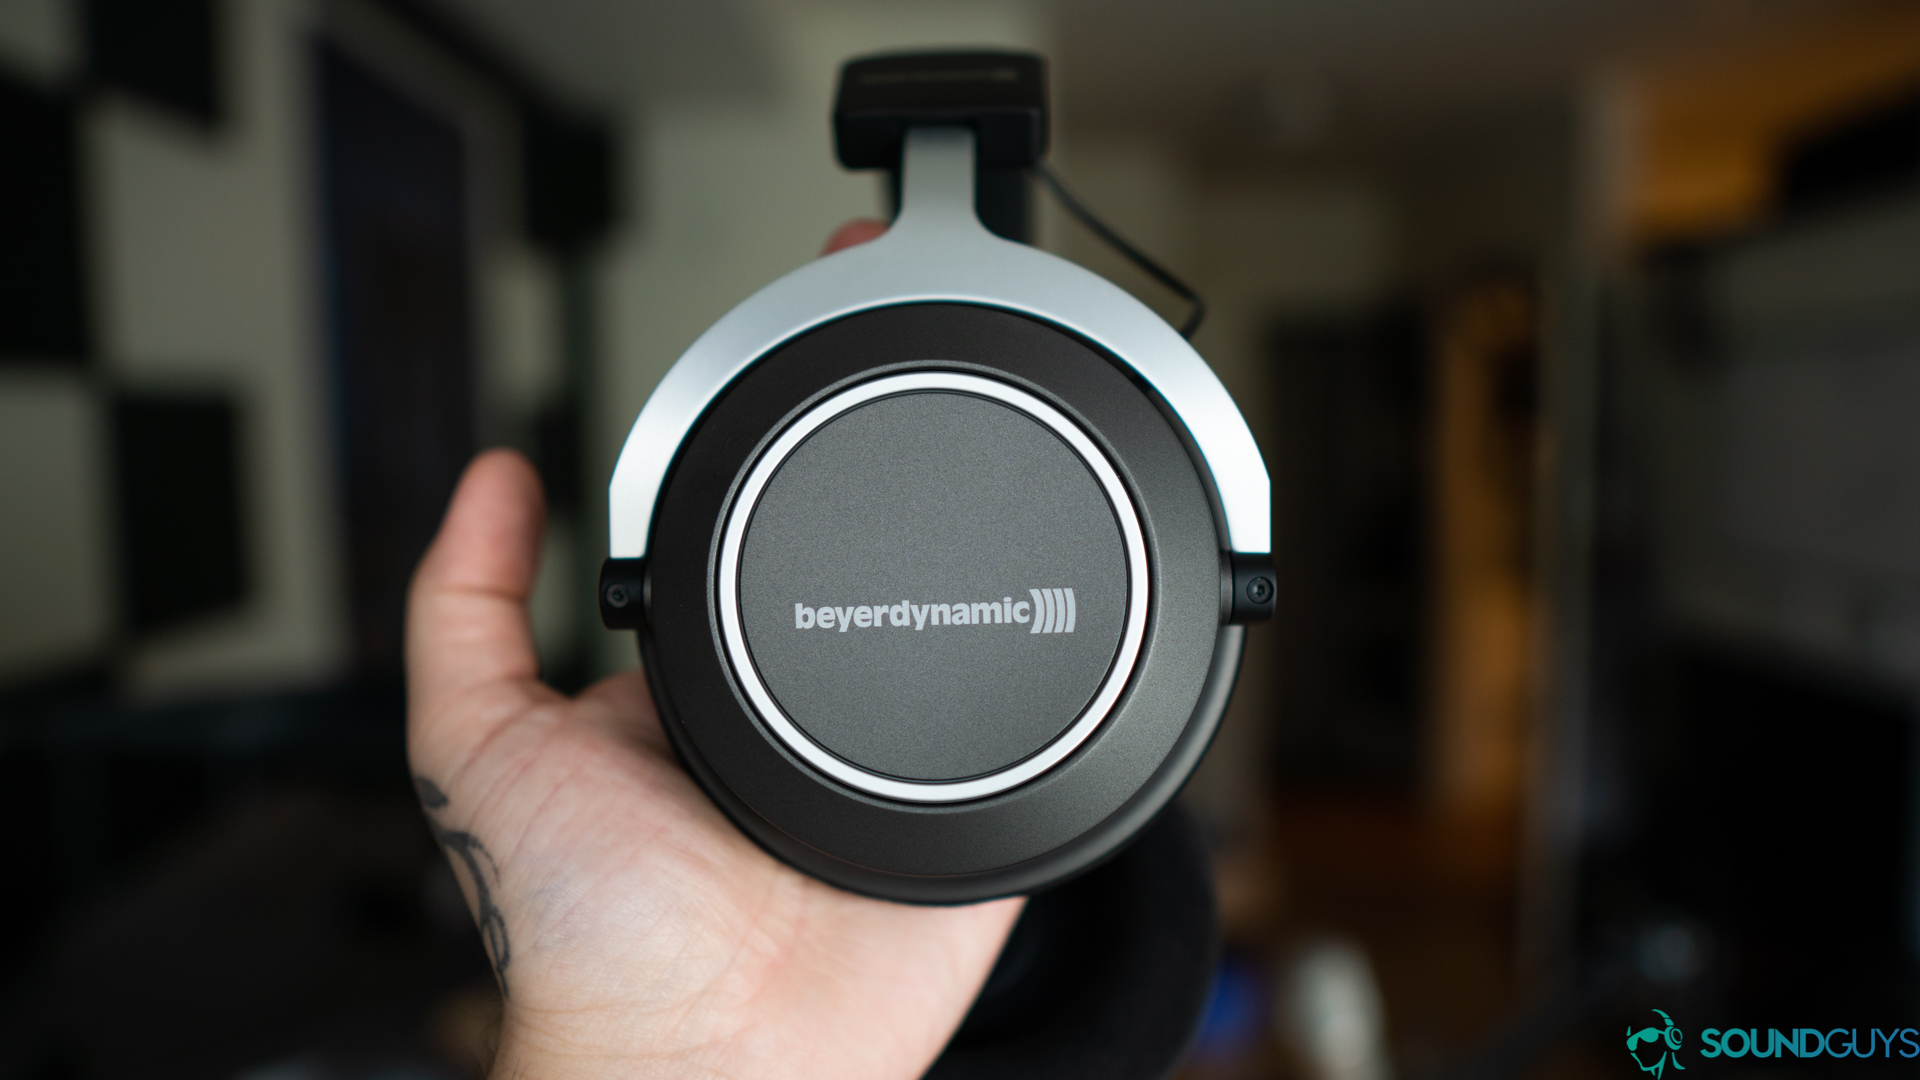 The Beyerdynamic logo on the right ear cup. 